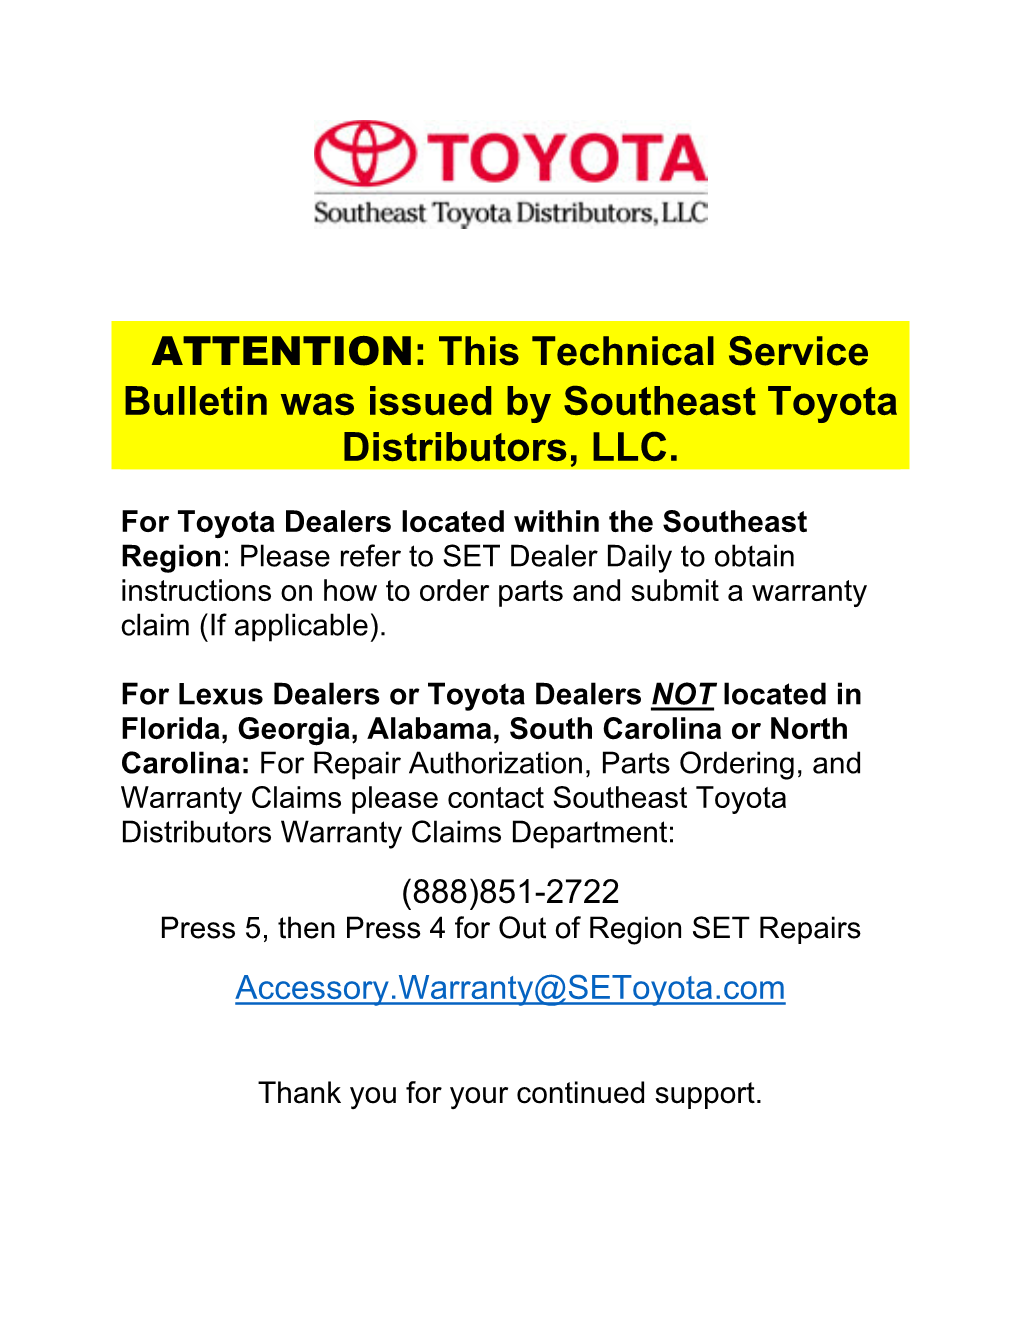 This Technical Service Bulletin Was Issued by Southeast Toyota Distributors, LLC